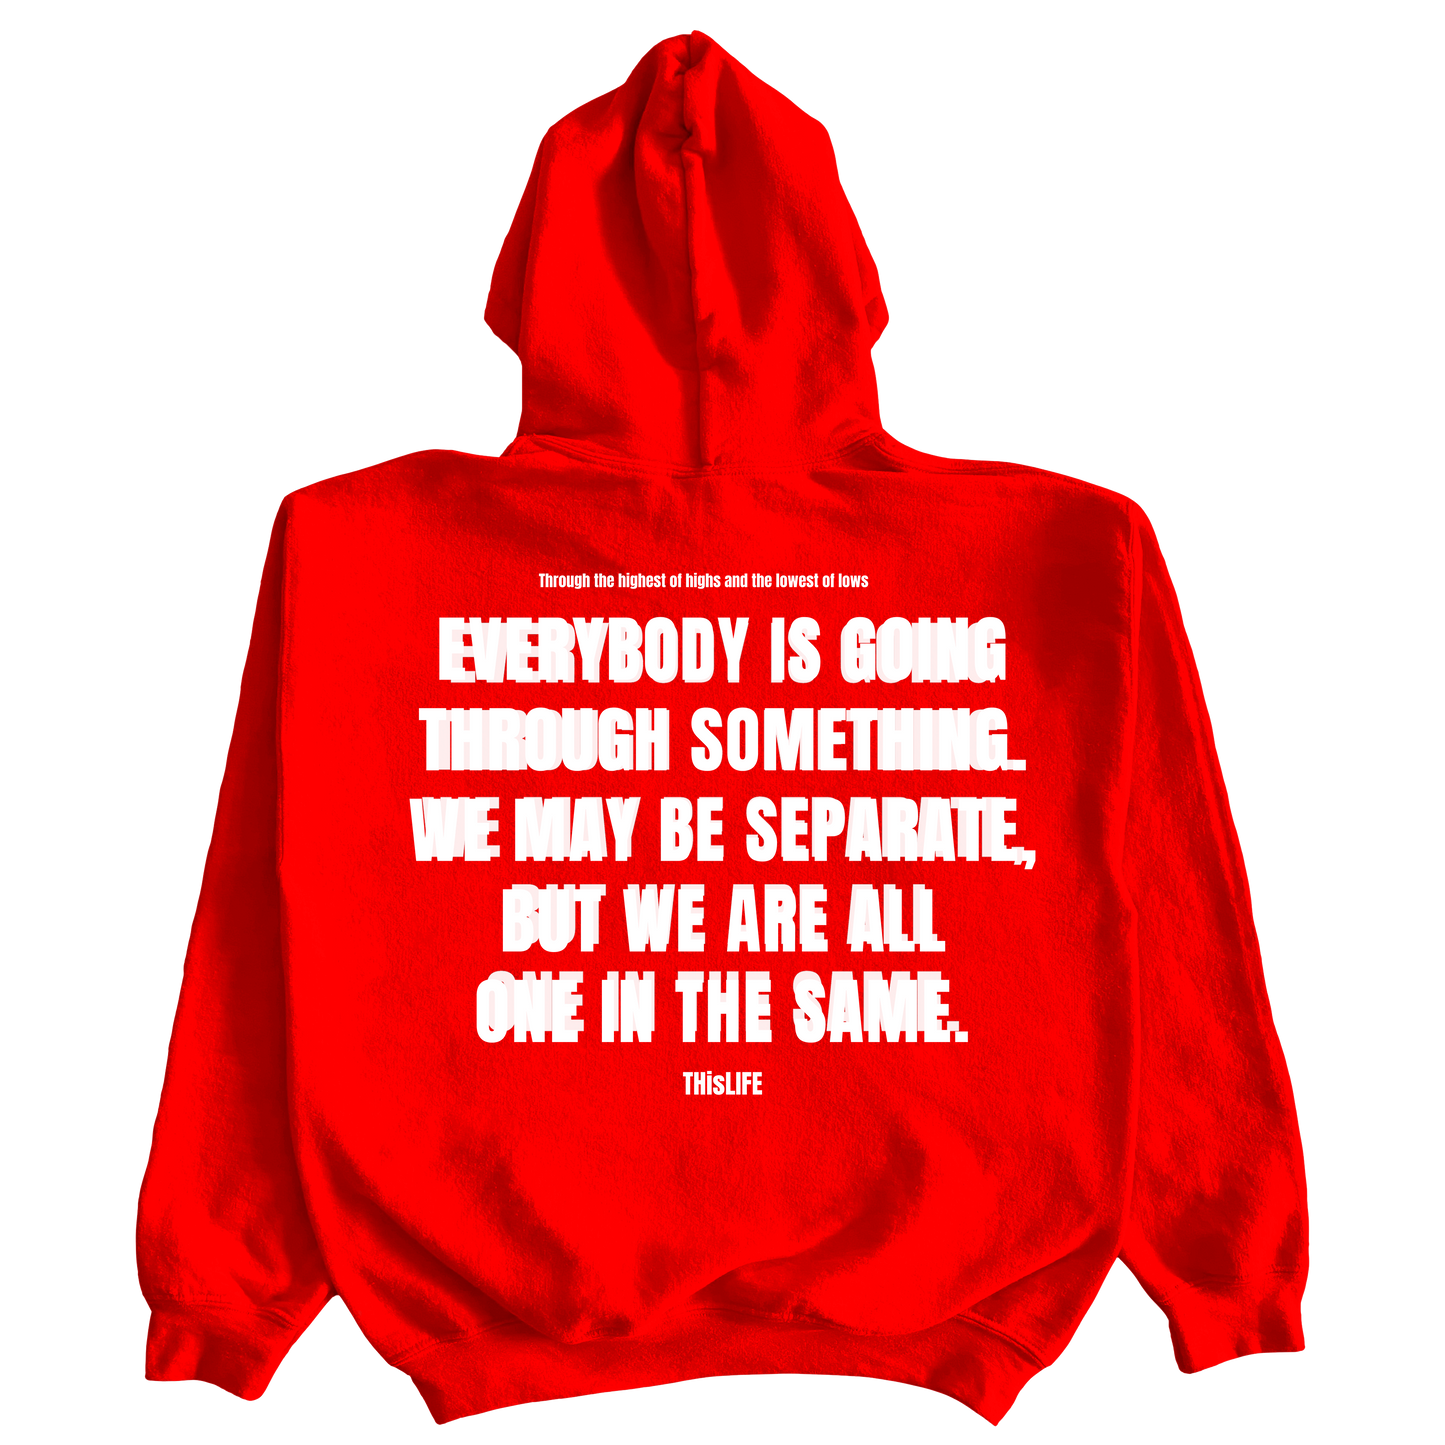 red champion pullover hoodie with THisLIFE Worldwide design